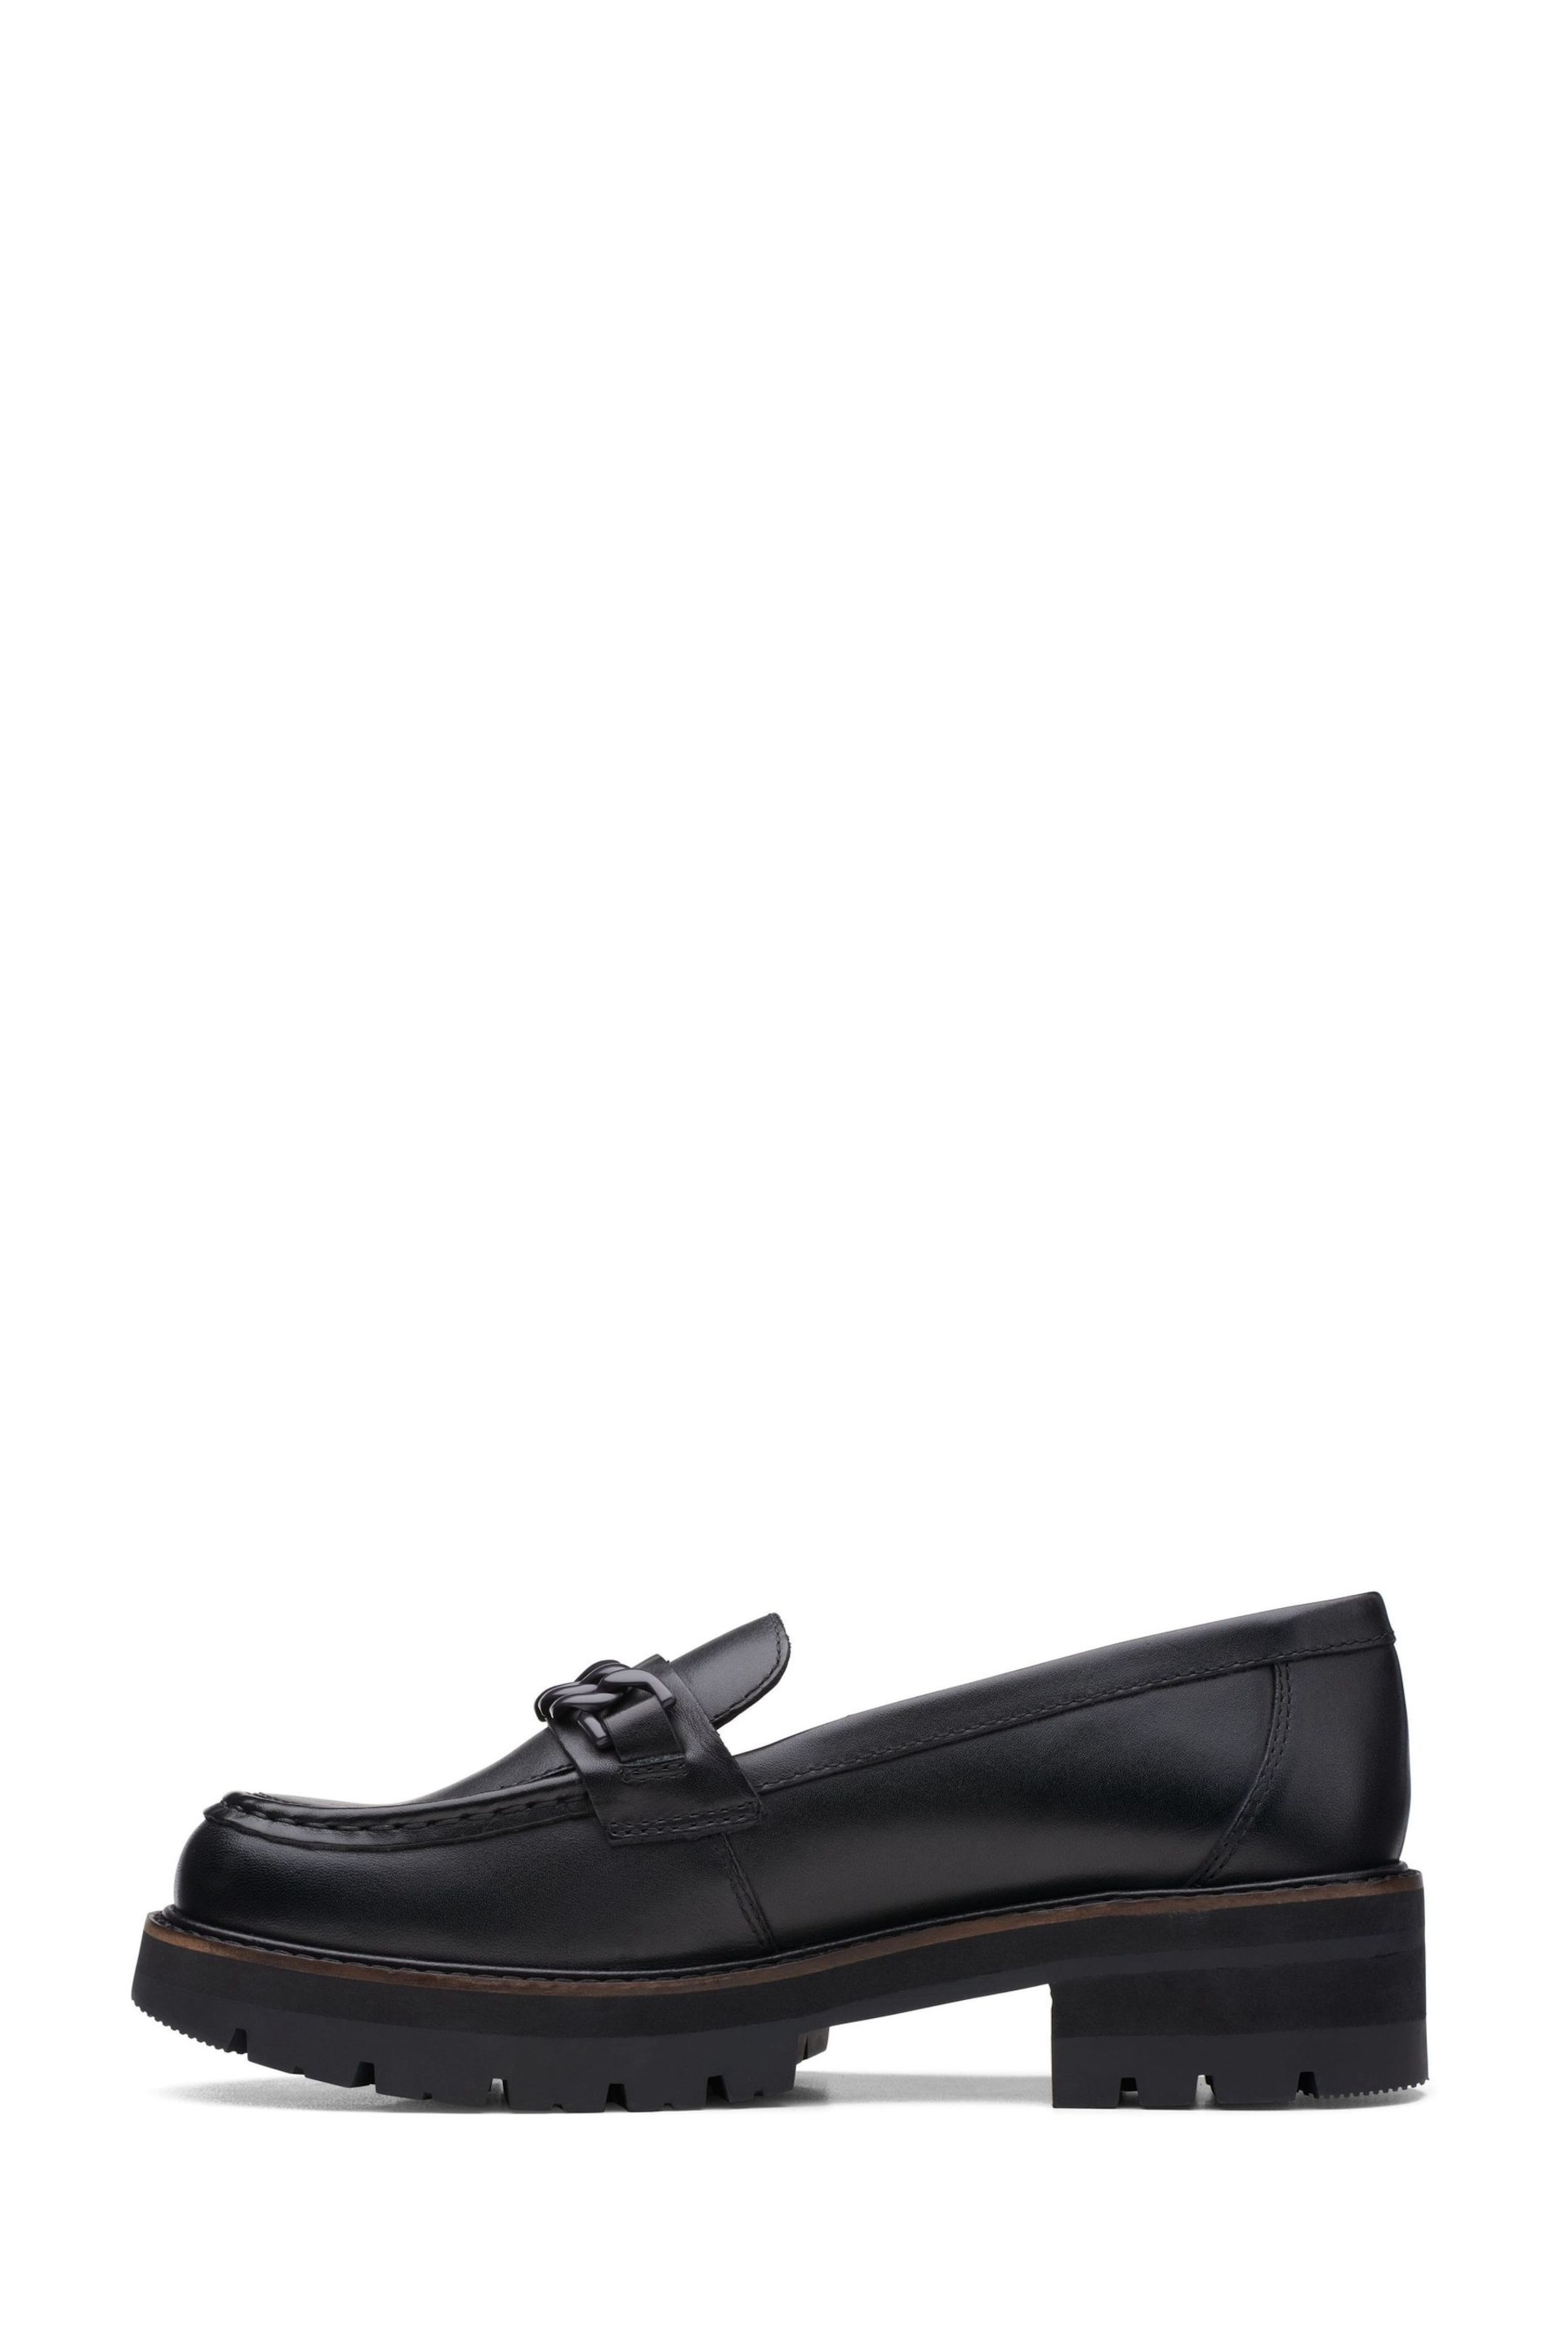 Clarks Black Leather Orianna Edge Loafer Shoes - Image 2 of 7